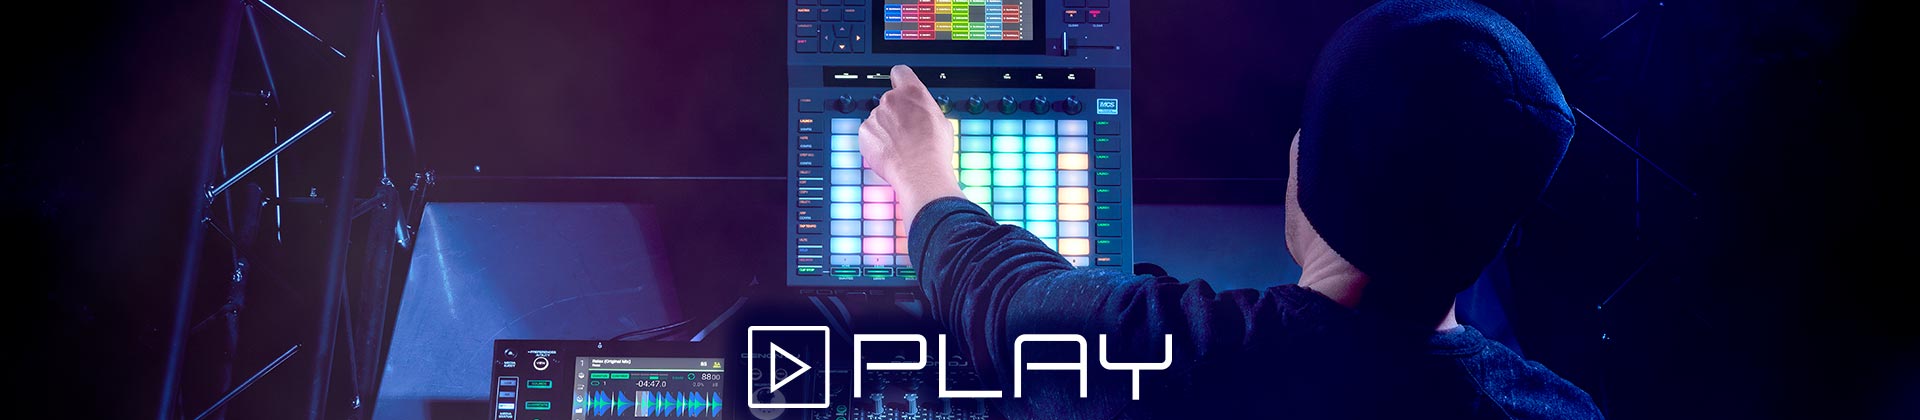 Akai announce an all-in-one music production studio that doesn’t need a computer